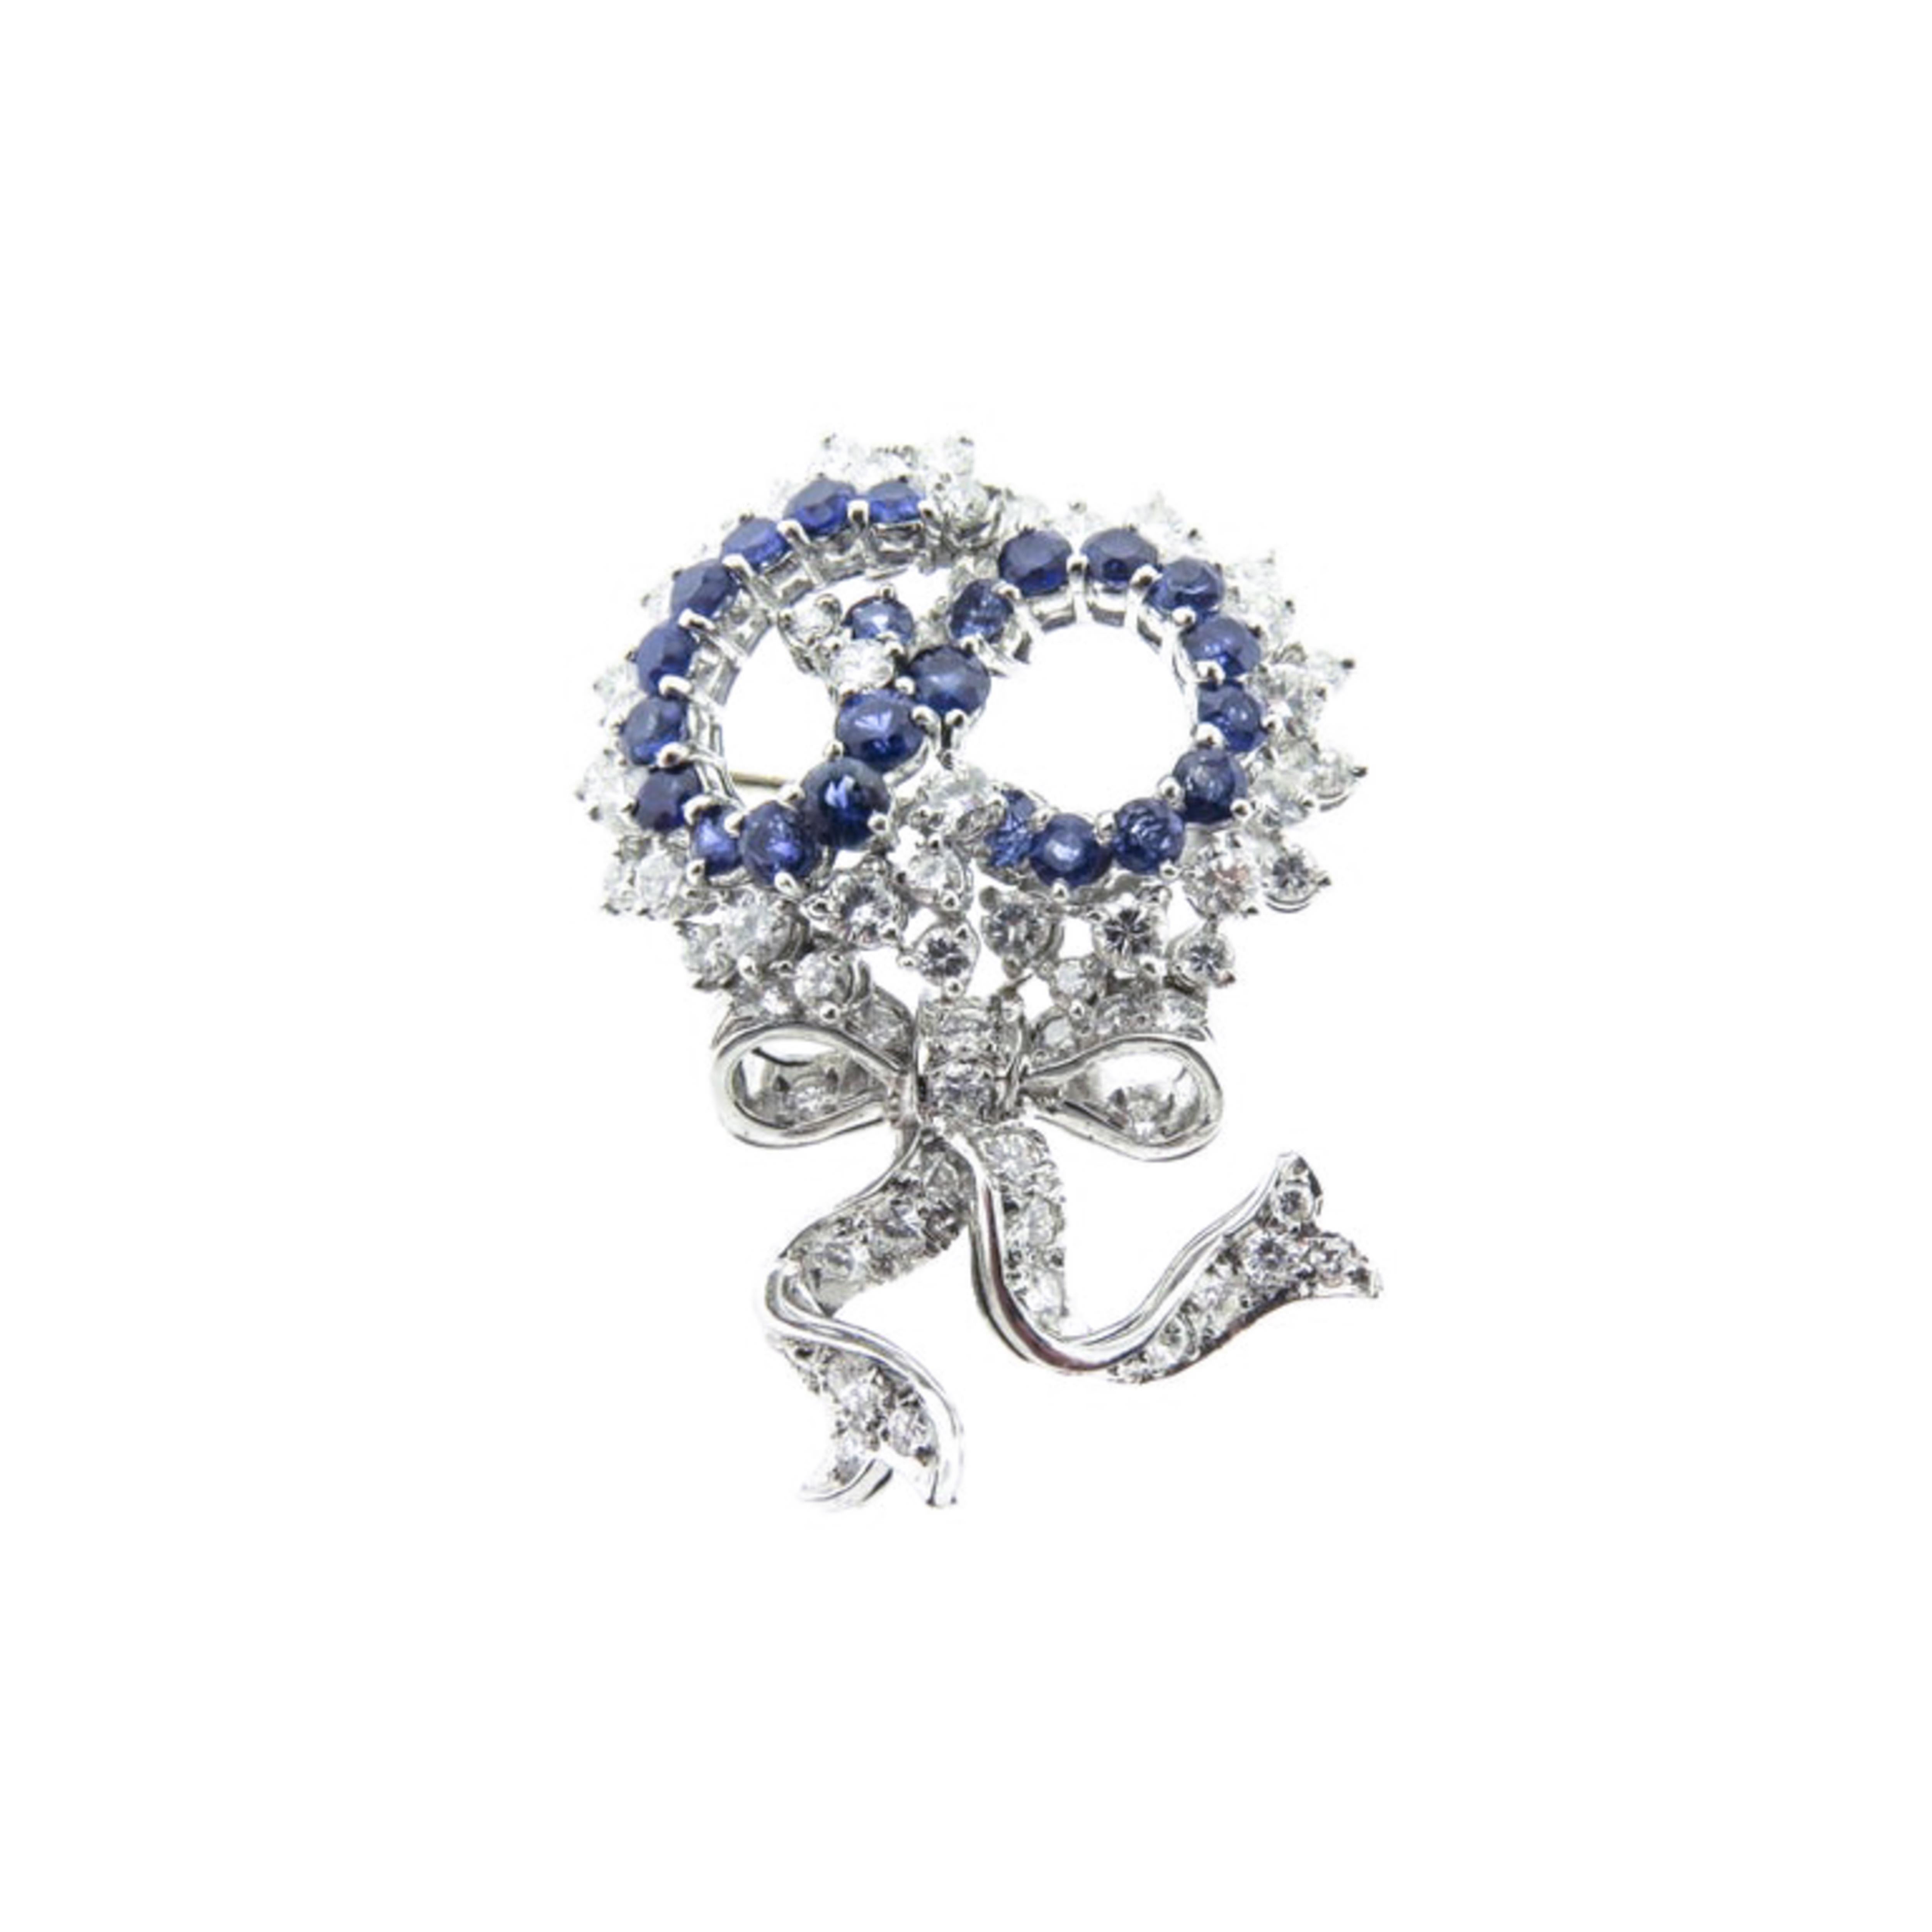 This whimsical 'ribbon swirl' platinum brooch is set with a multitude of white diamonds and blue sapphires has a very timeless feel. 
Crafted in Platinum with an amazing arrangement of approximately 64 round Diamonds, totaling 4.72 carats and 23